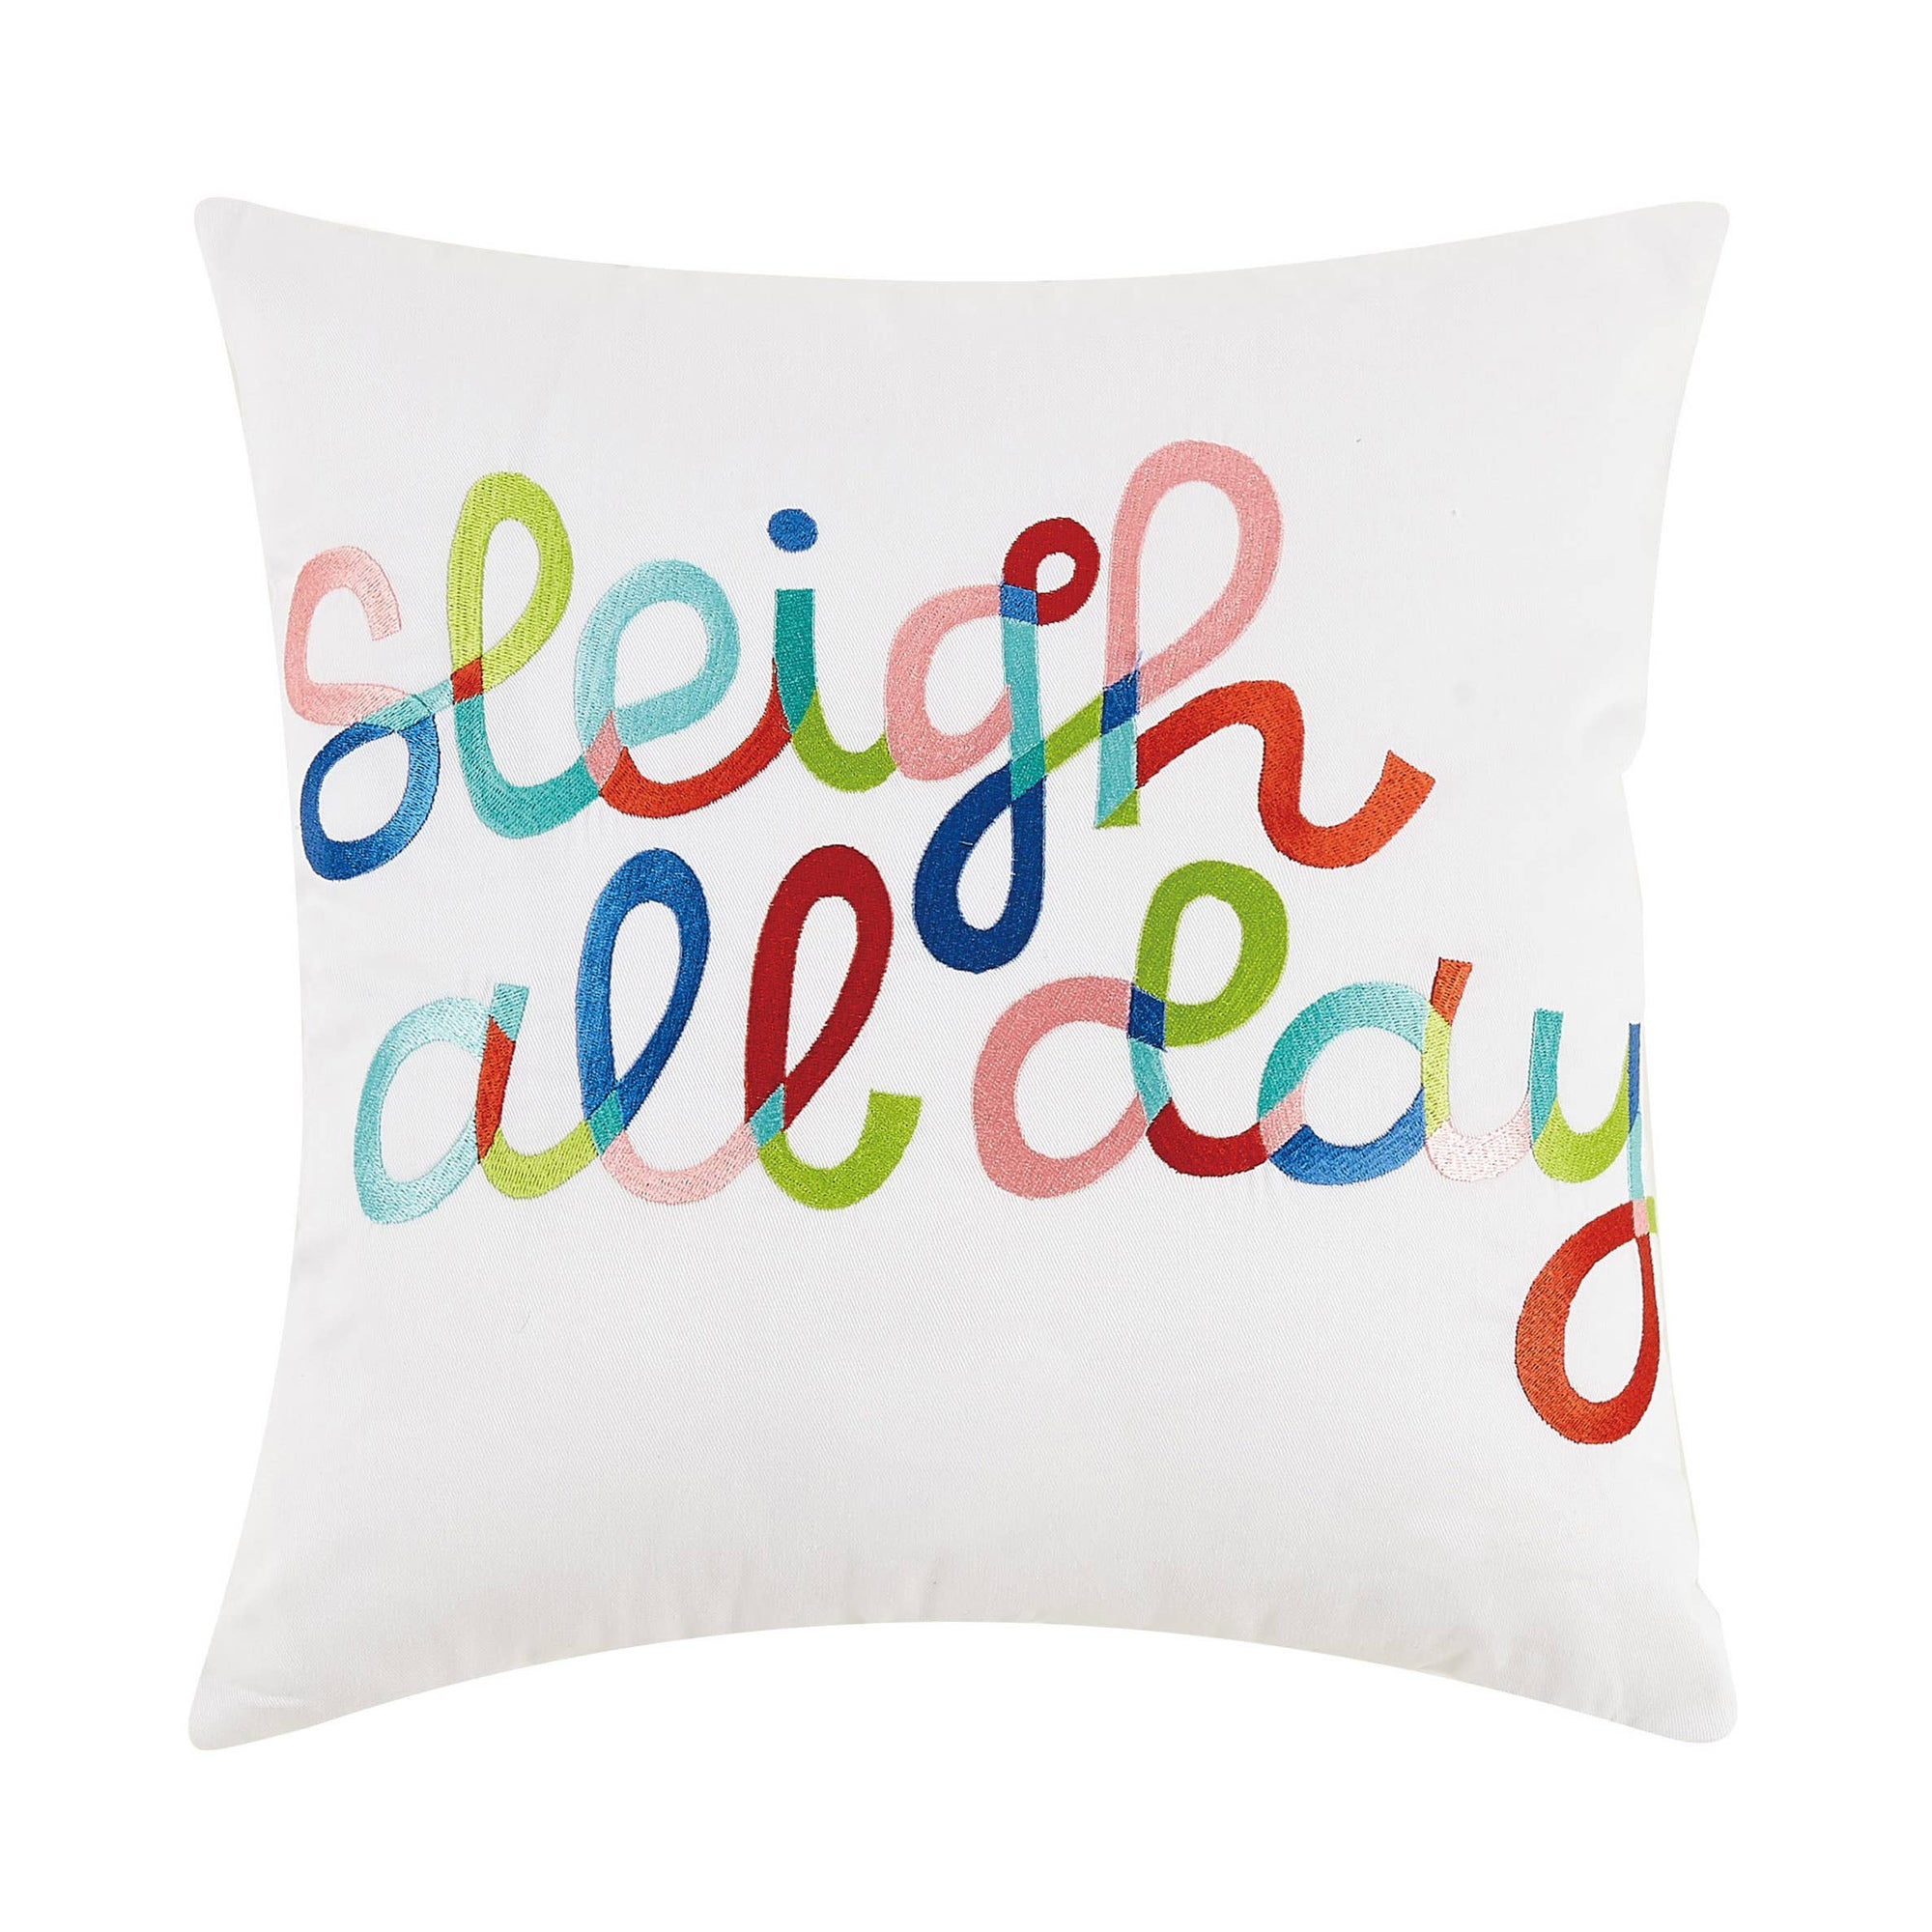 Sleigh All Day Embroidered Pillow On White by Ampersand